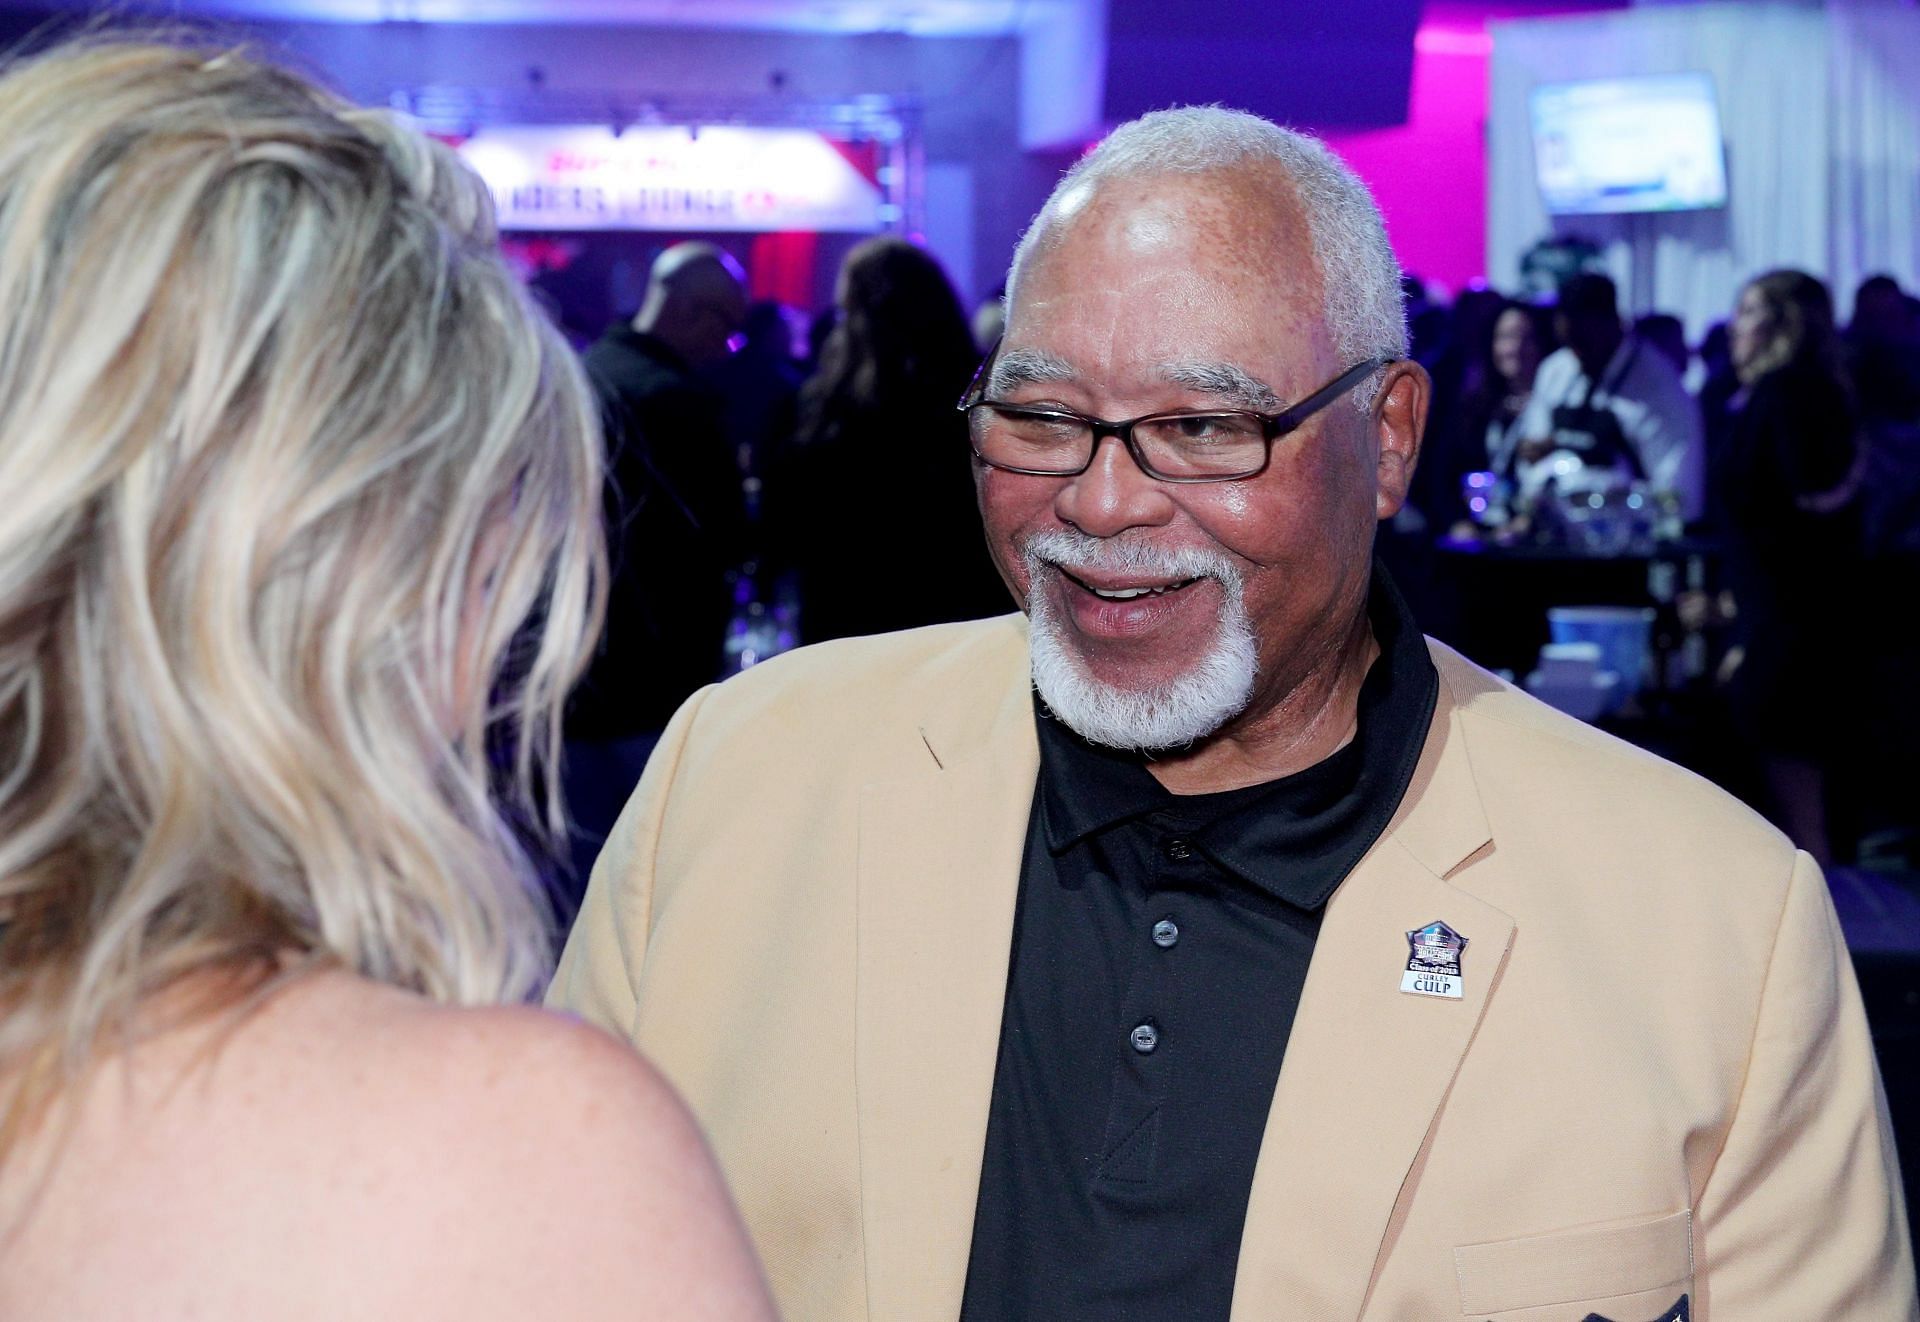 Taste Of The NFL Comes Home To Minnesota for The 27th Annual Party With A Purpose